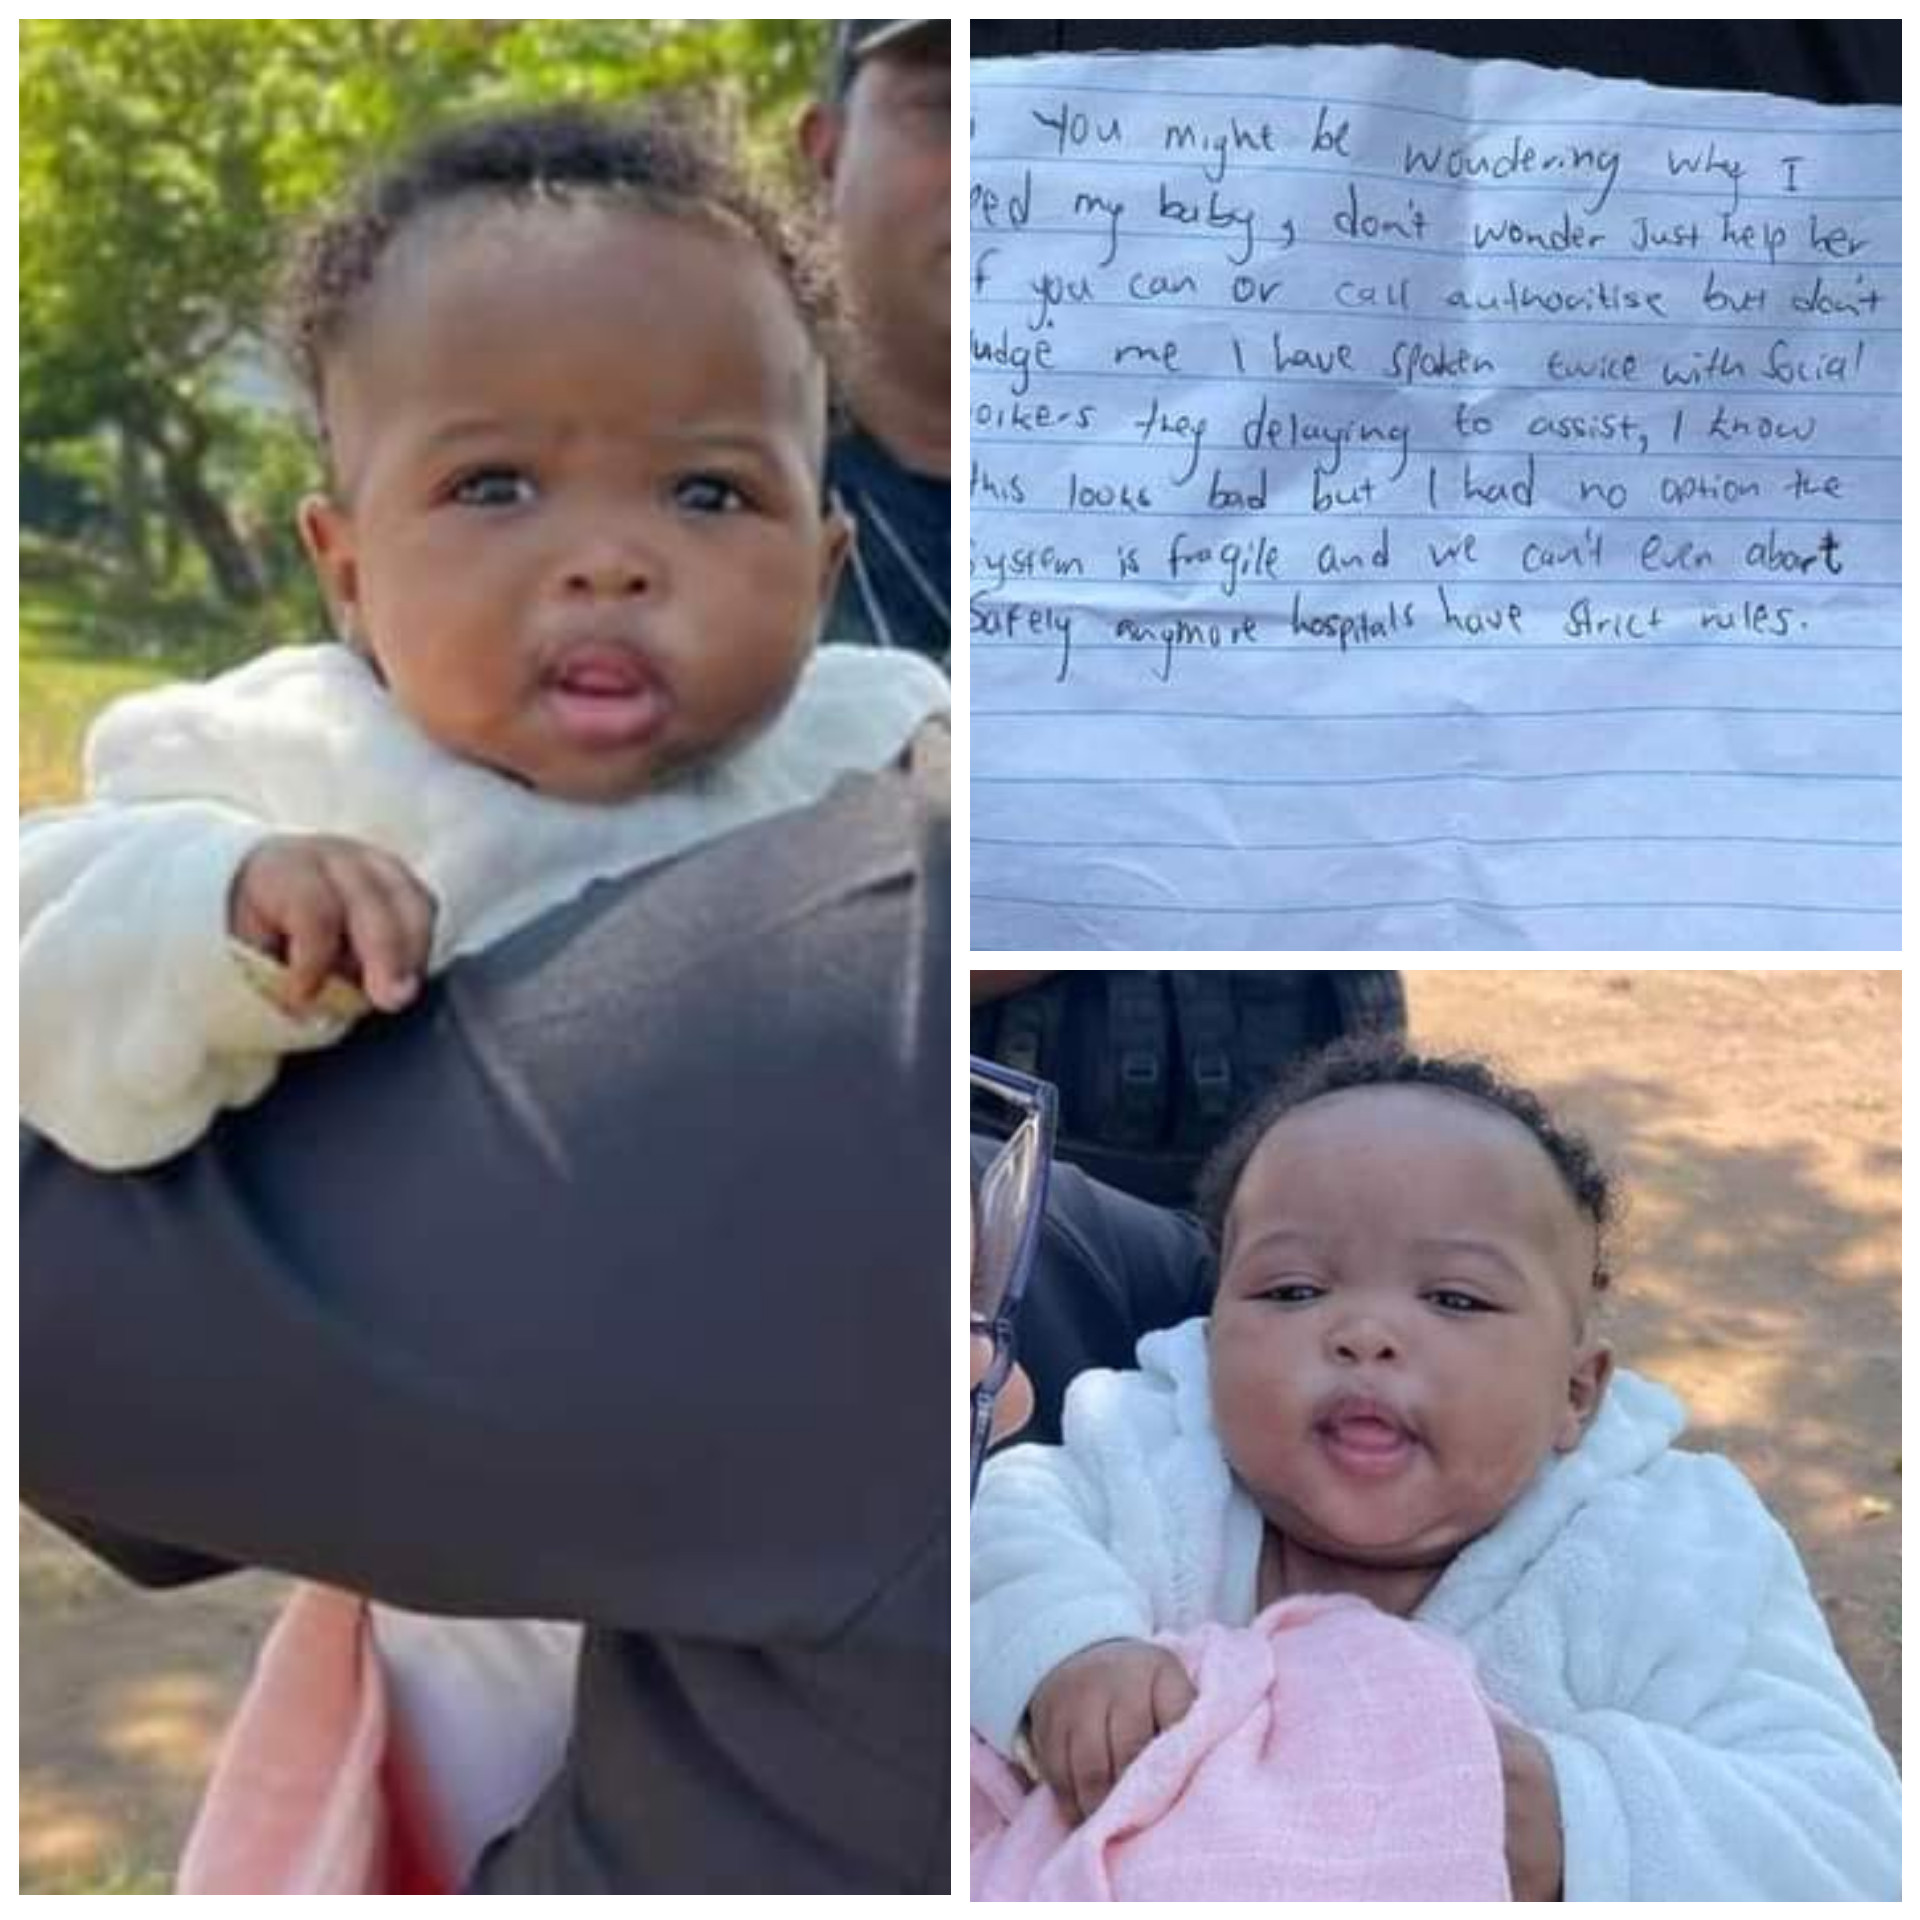 Baby girl found dumped in South Africa with note from mother saying: